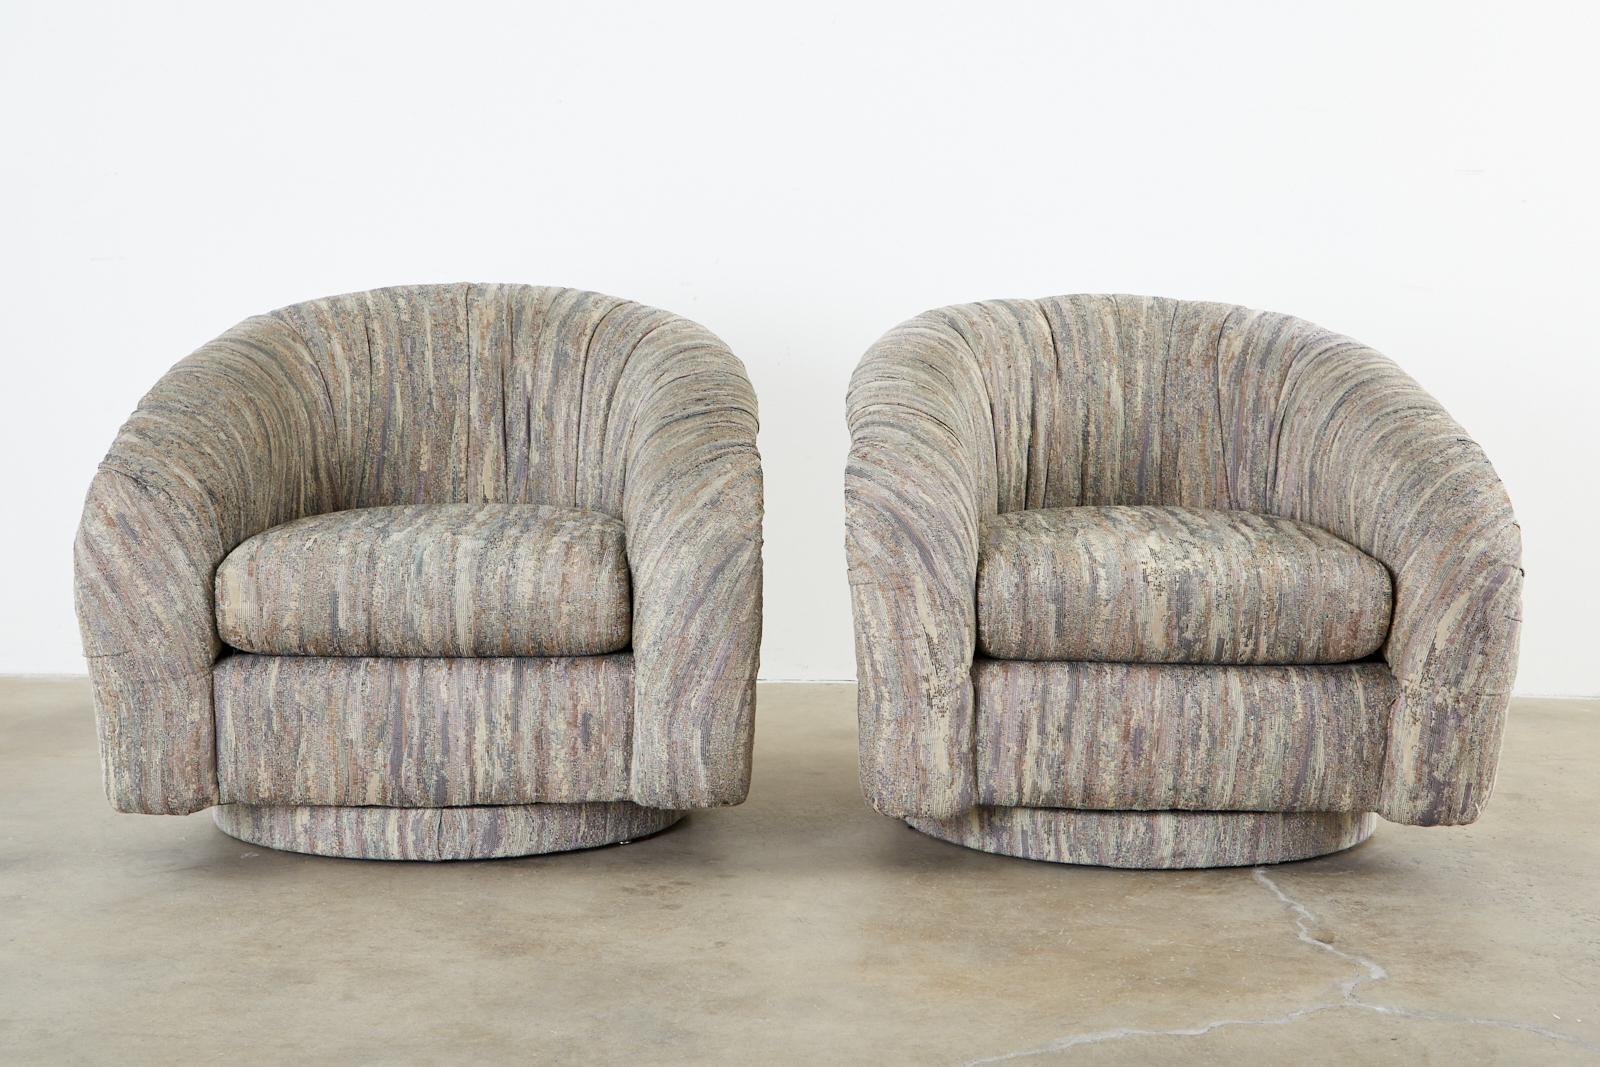 Iconic pair of swivel lounge chairs or club chairs in the Mid-Century Modern style after Milo Baughman. Featuring a round barrel form upholstered with a late 1970s or 1980s style of fabric. Very presentable and comfortable with minimal wear in good